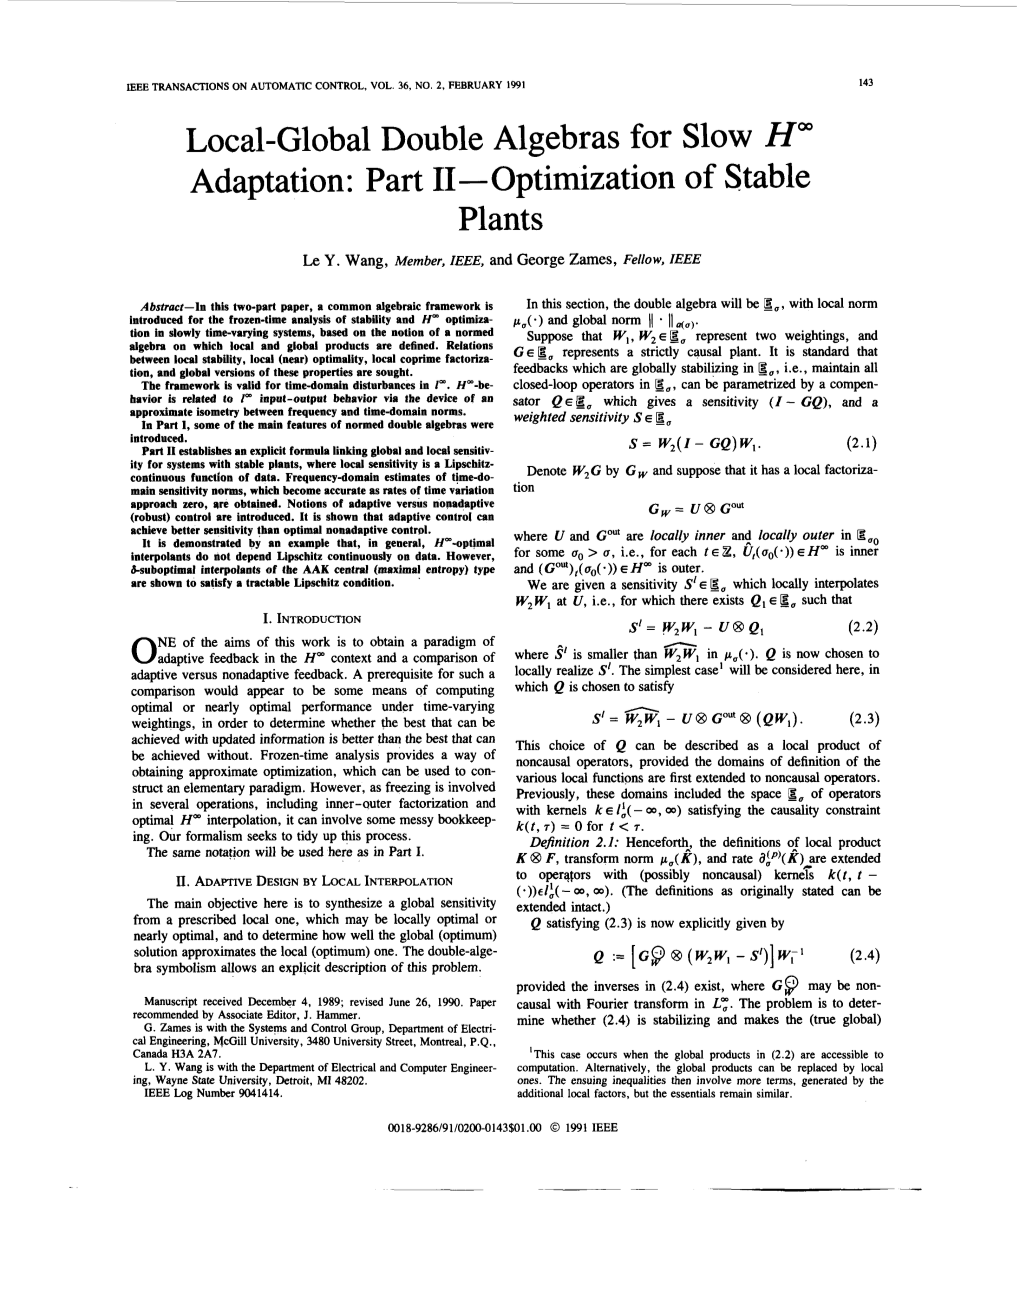 Local-Global Double Algebras for Slow H- Adaptation: Part 11- Optimization of Stable Plants Le Y